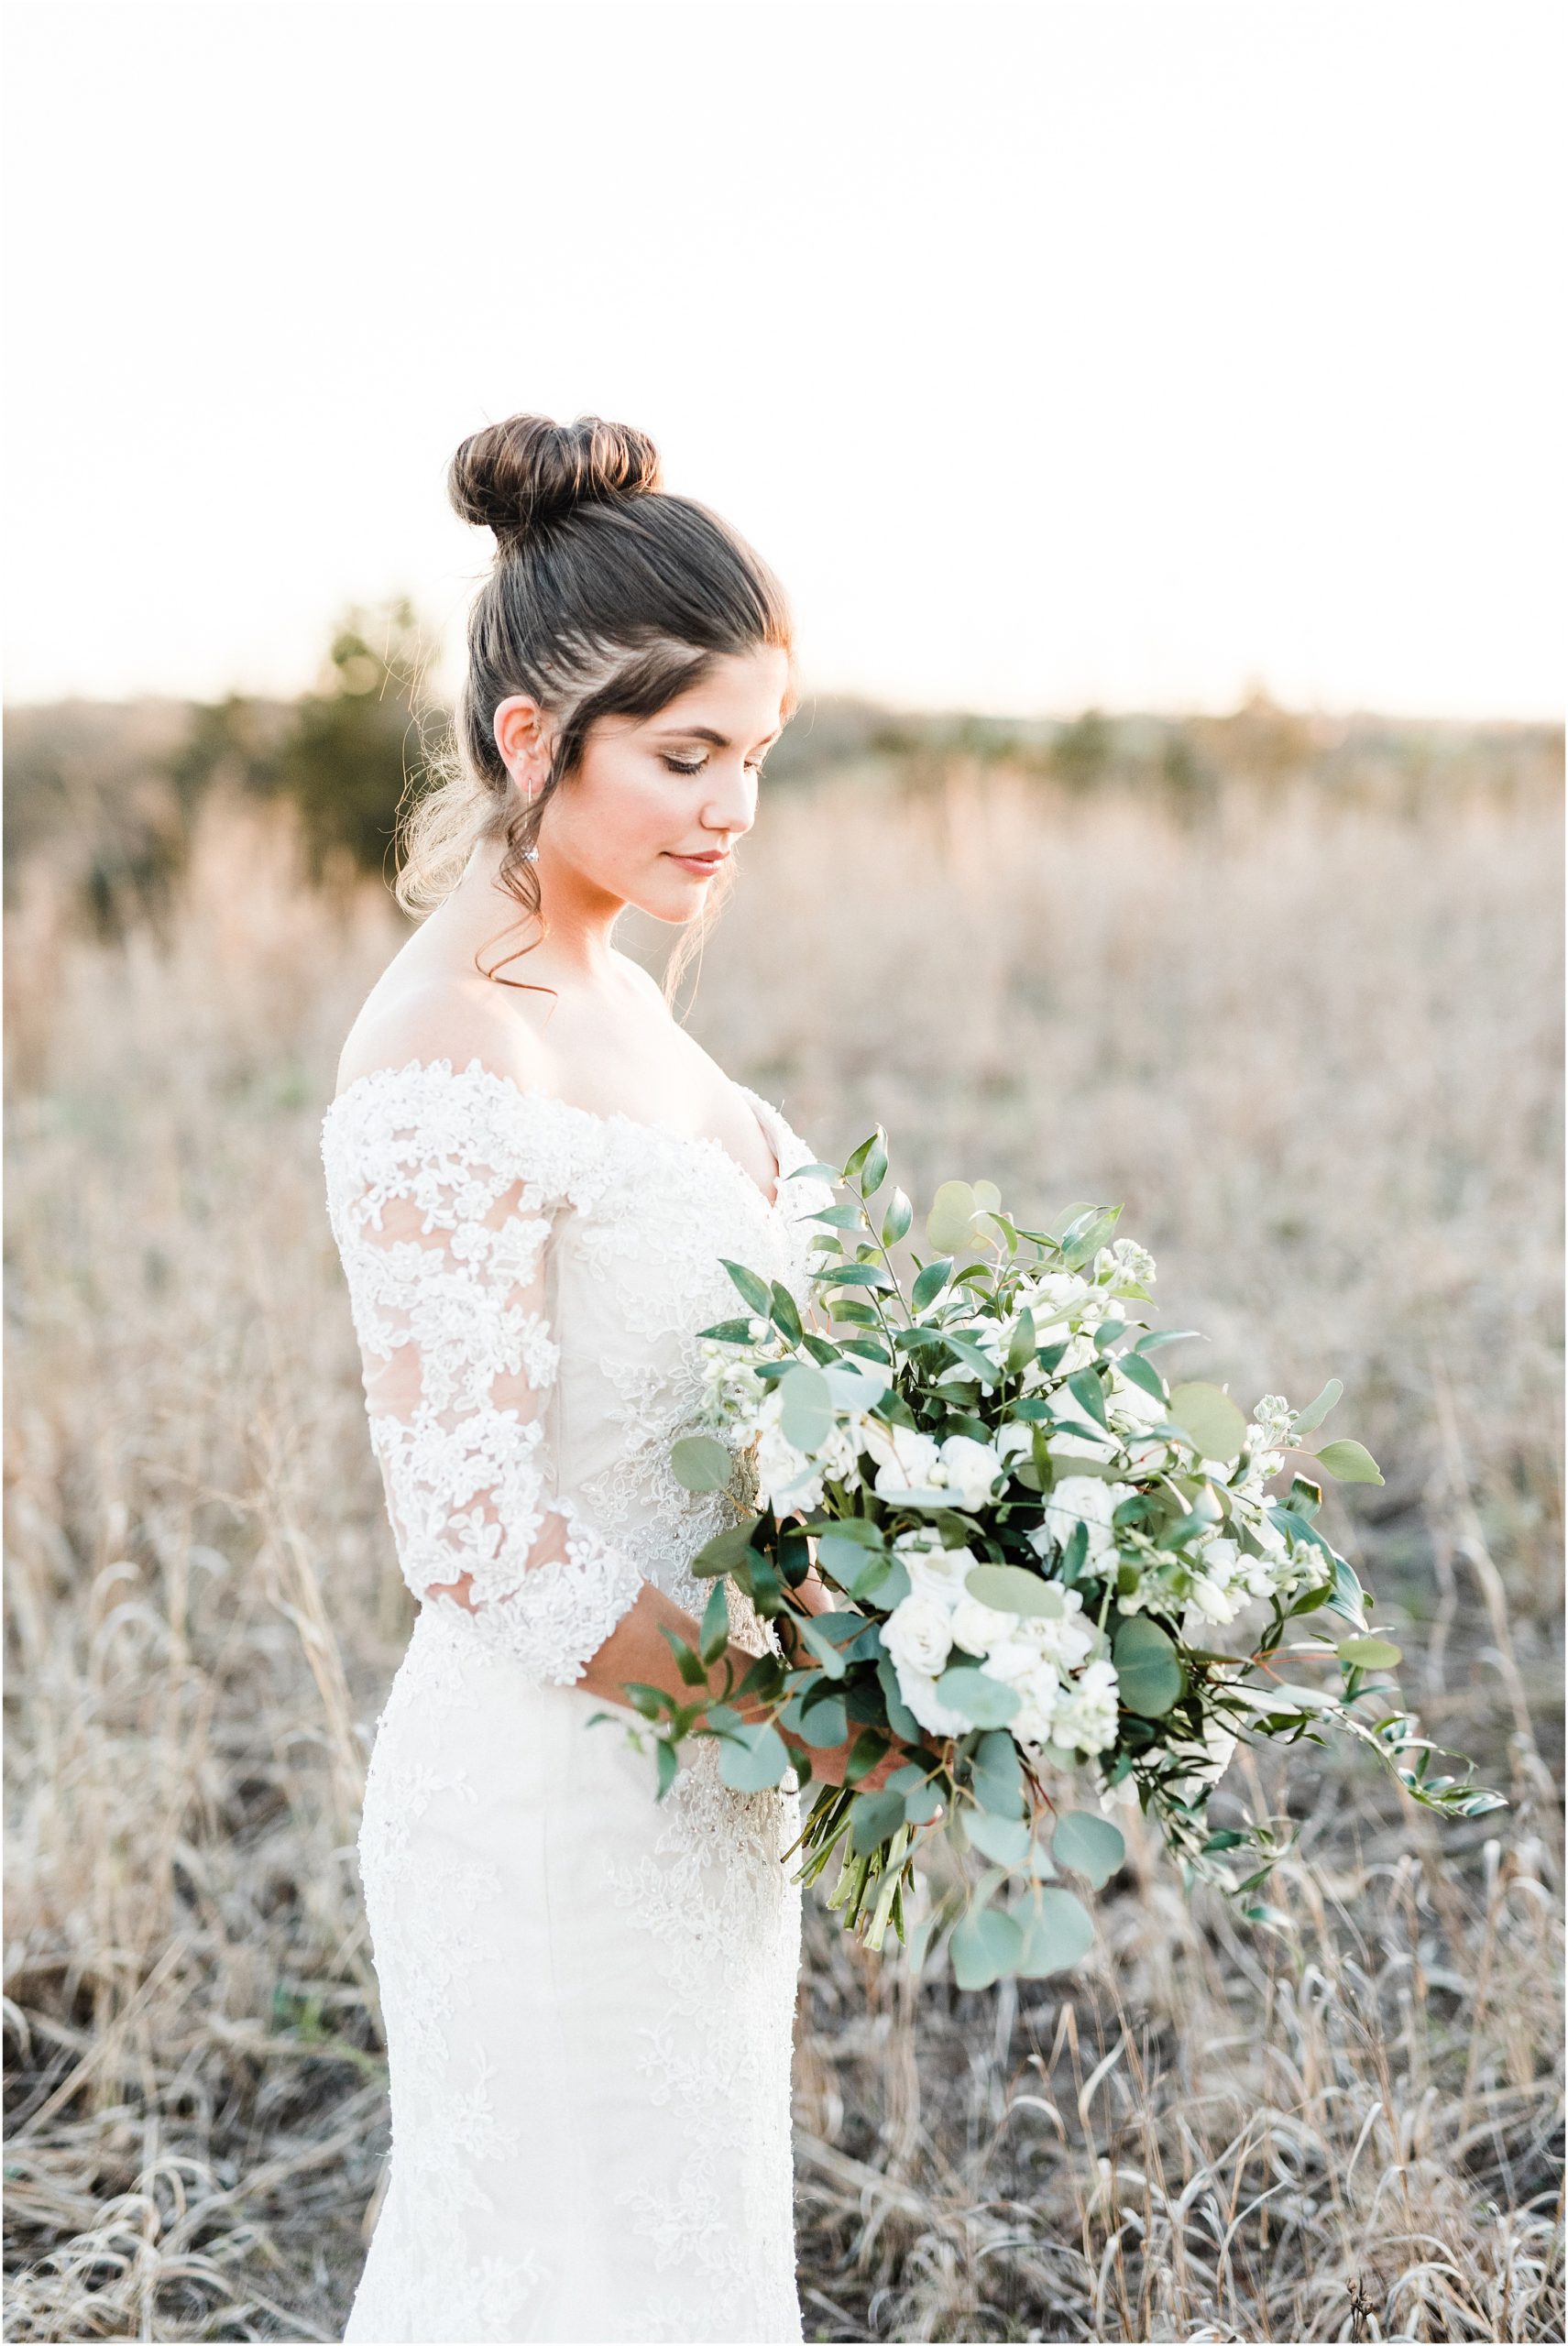 bridal portrait of bride with brown hair up in bun looking down at green and white bouquet during bridal session in field at sunset